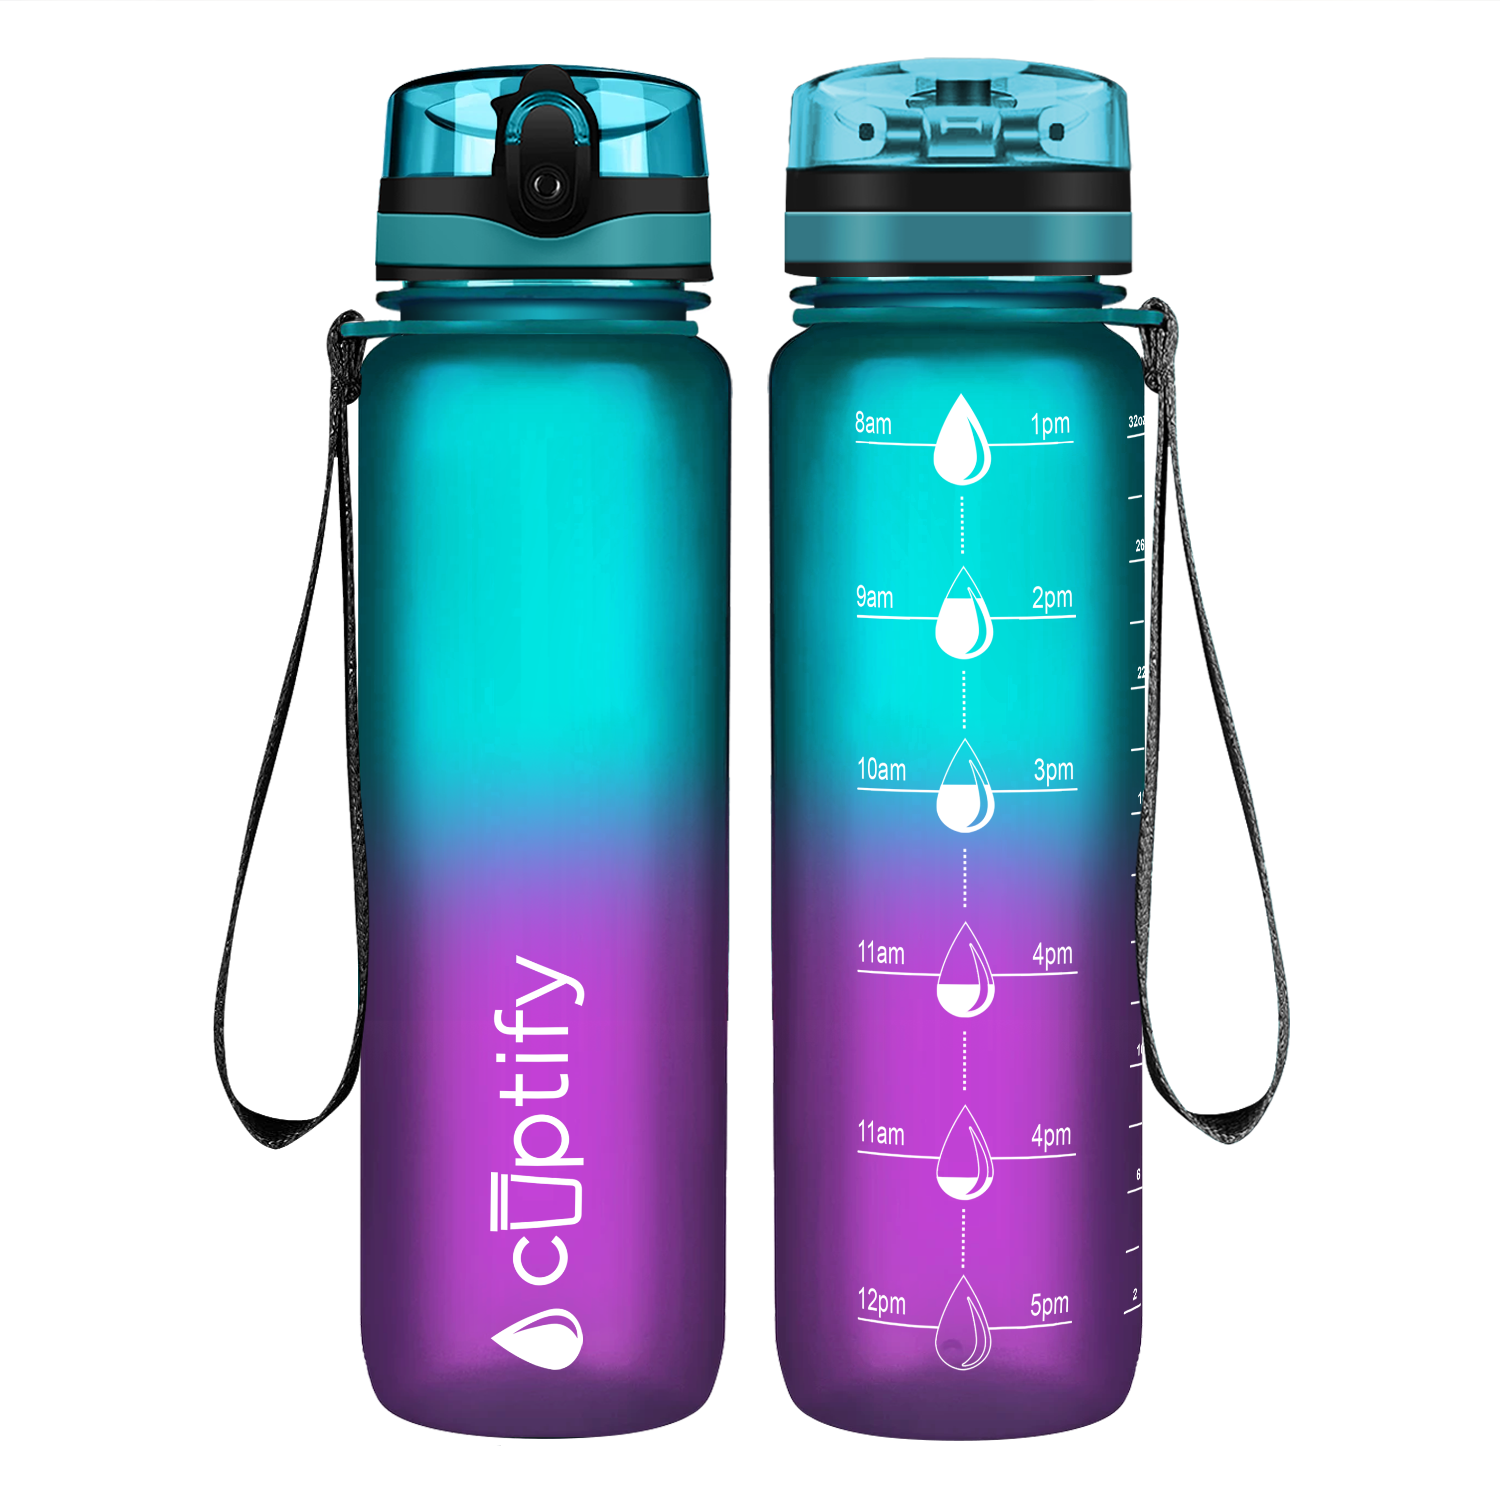 Cuptify Mermaid Frosted Hydration Tracker Water Bottle